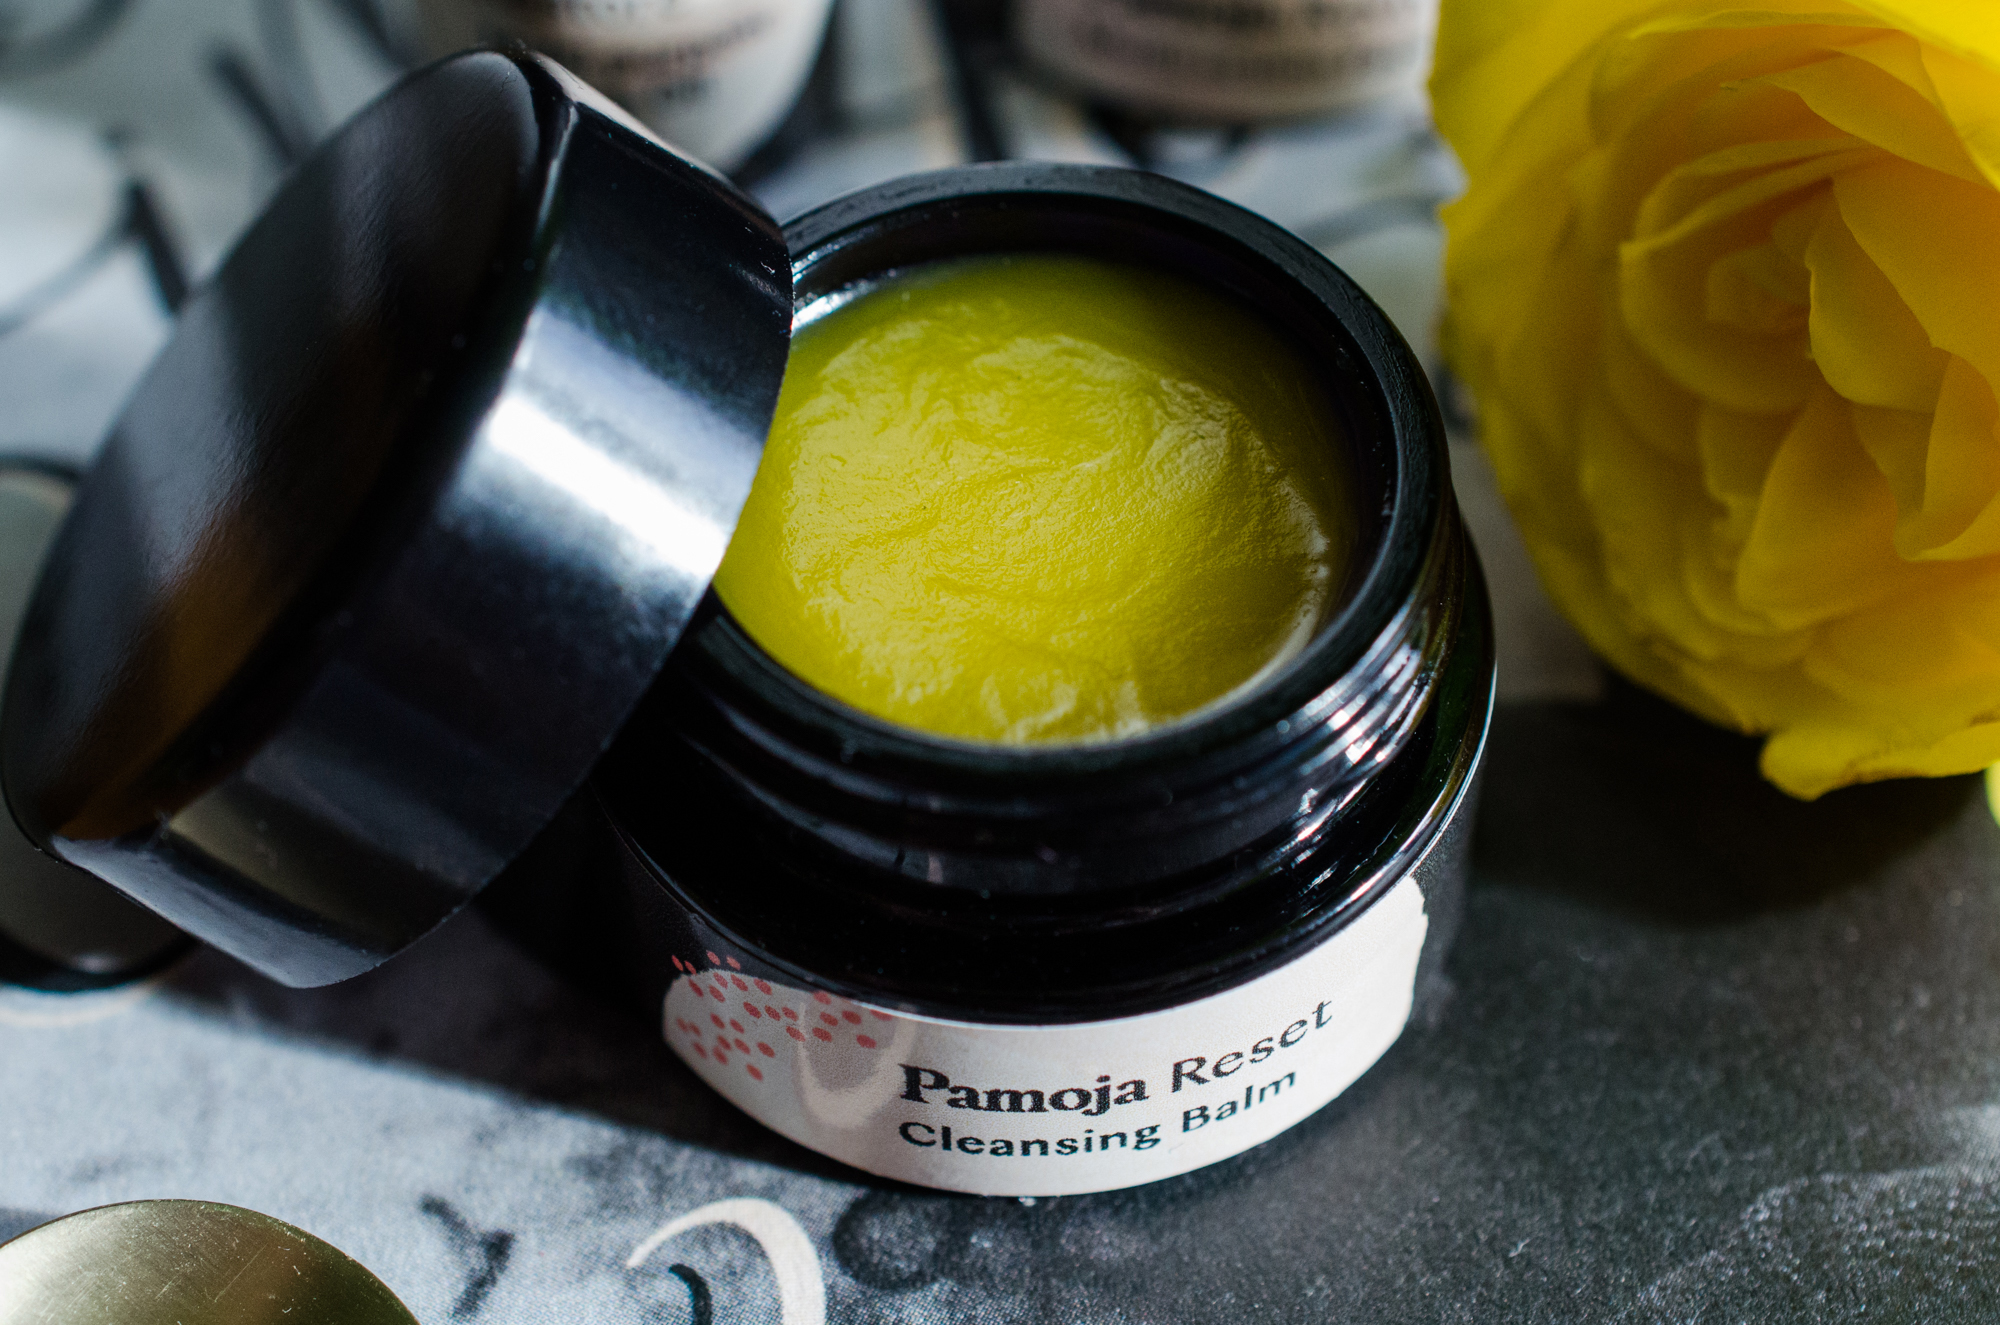 Pamoja Cleansing Balm is full of life